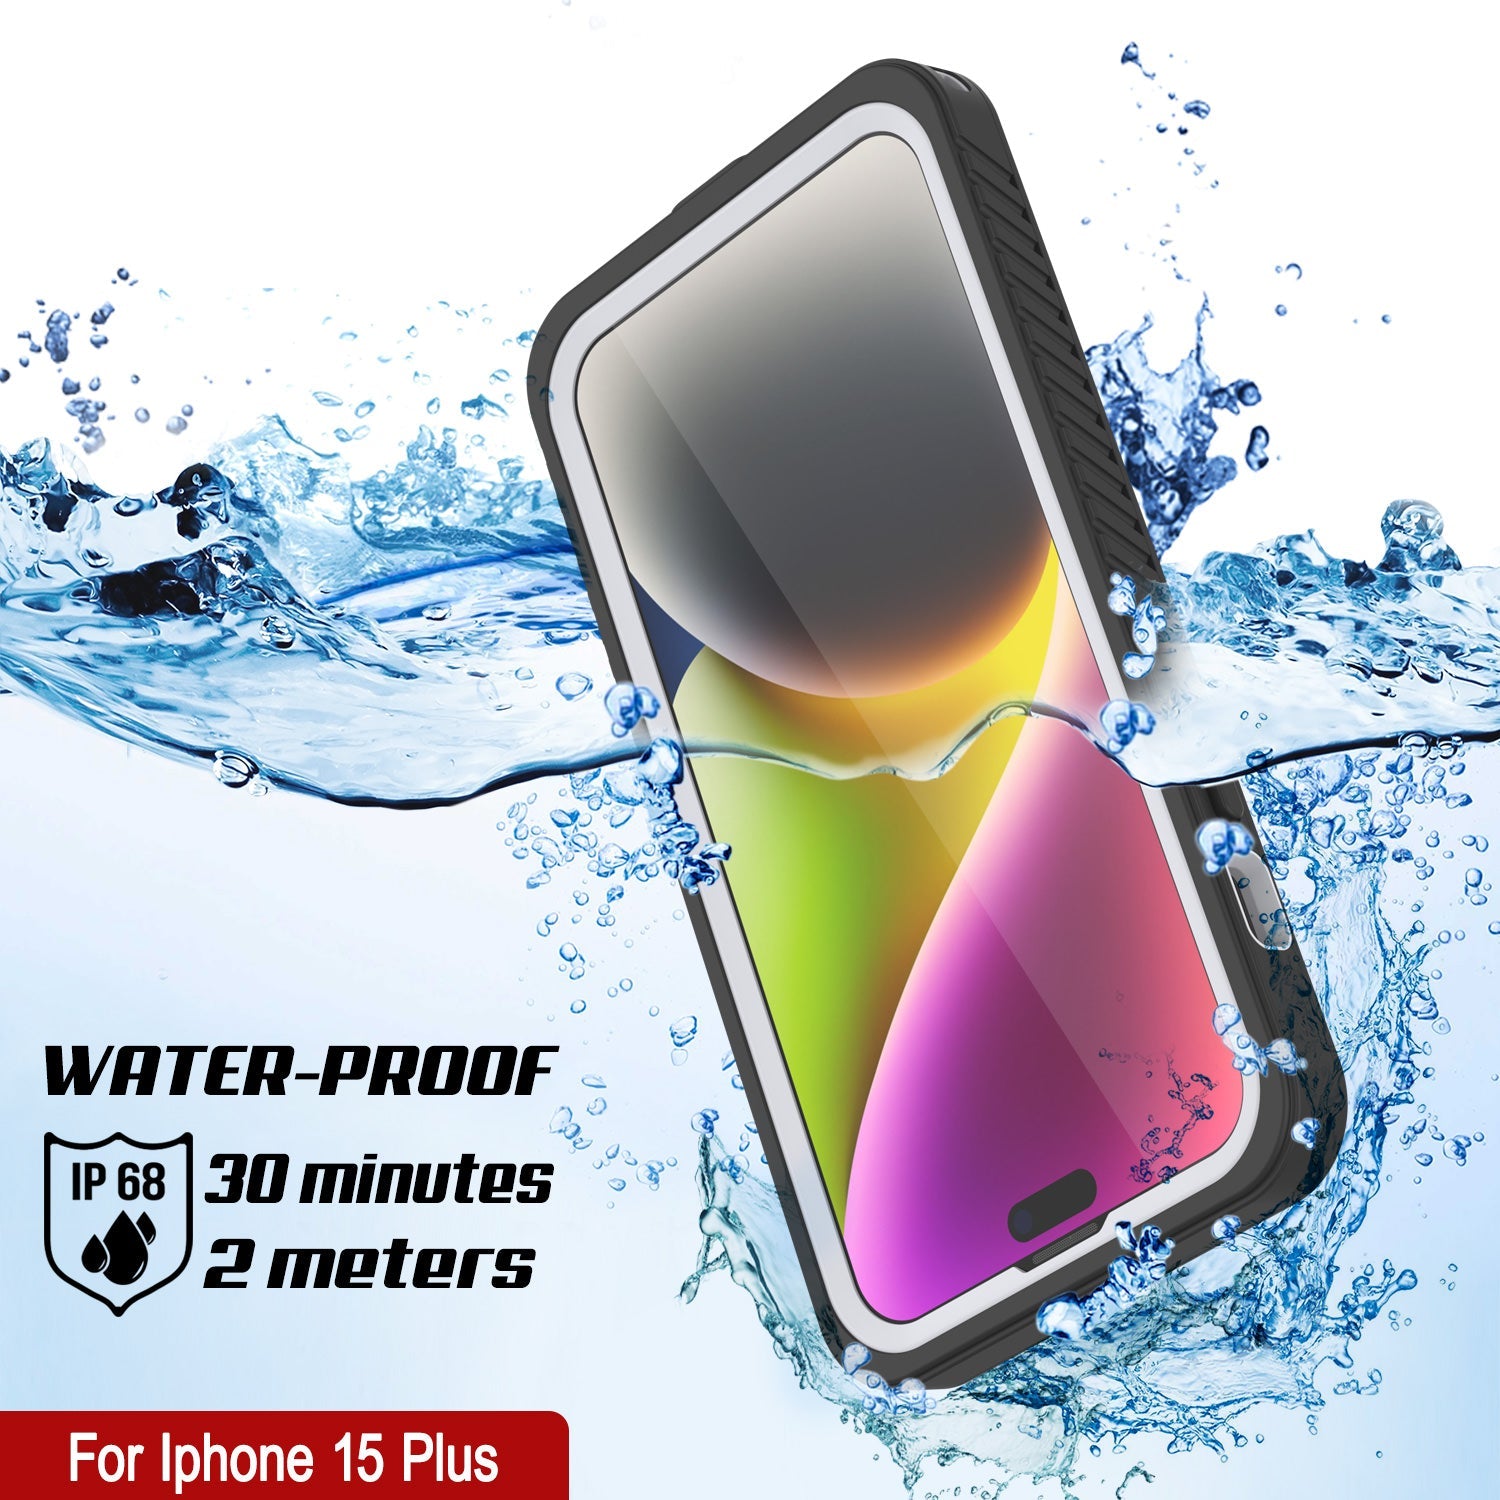 iPhone 15 Plus Waterproof Case, Punkcase [Extreme Series] Armor Cover W/ Built In Screen Protector [White]